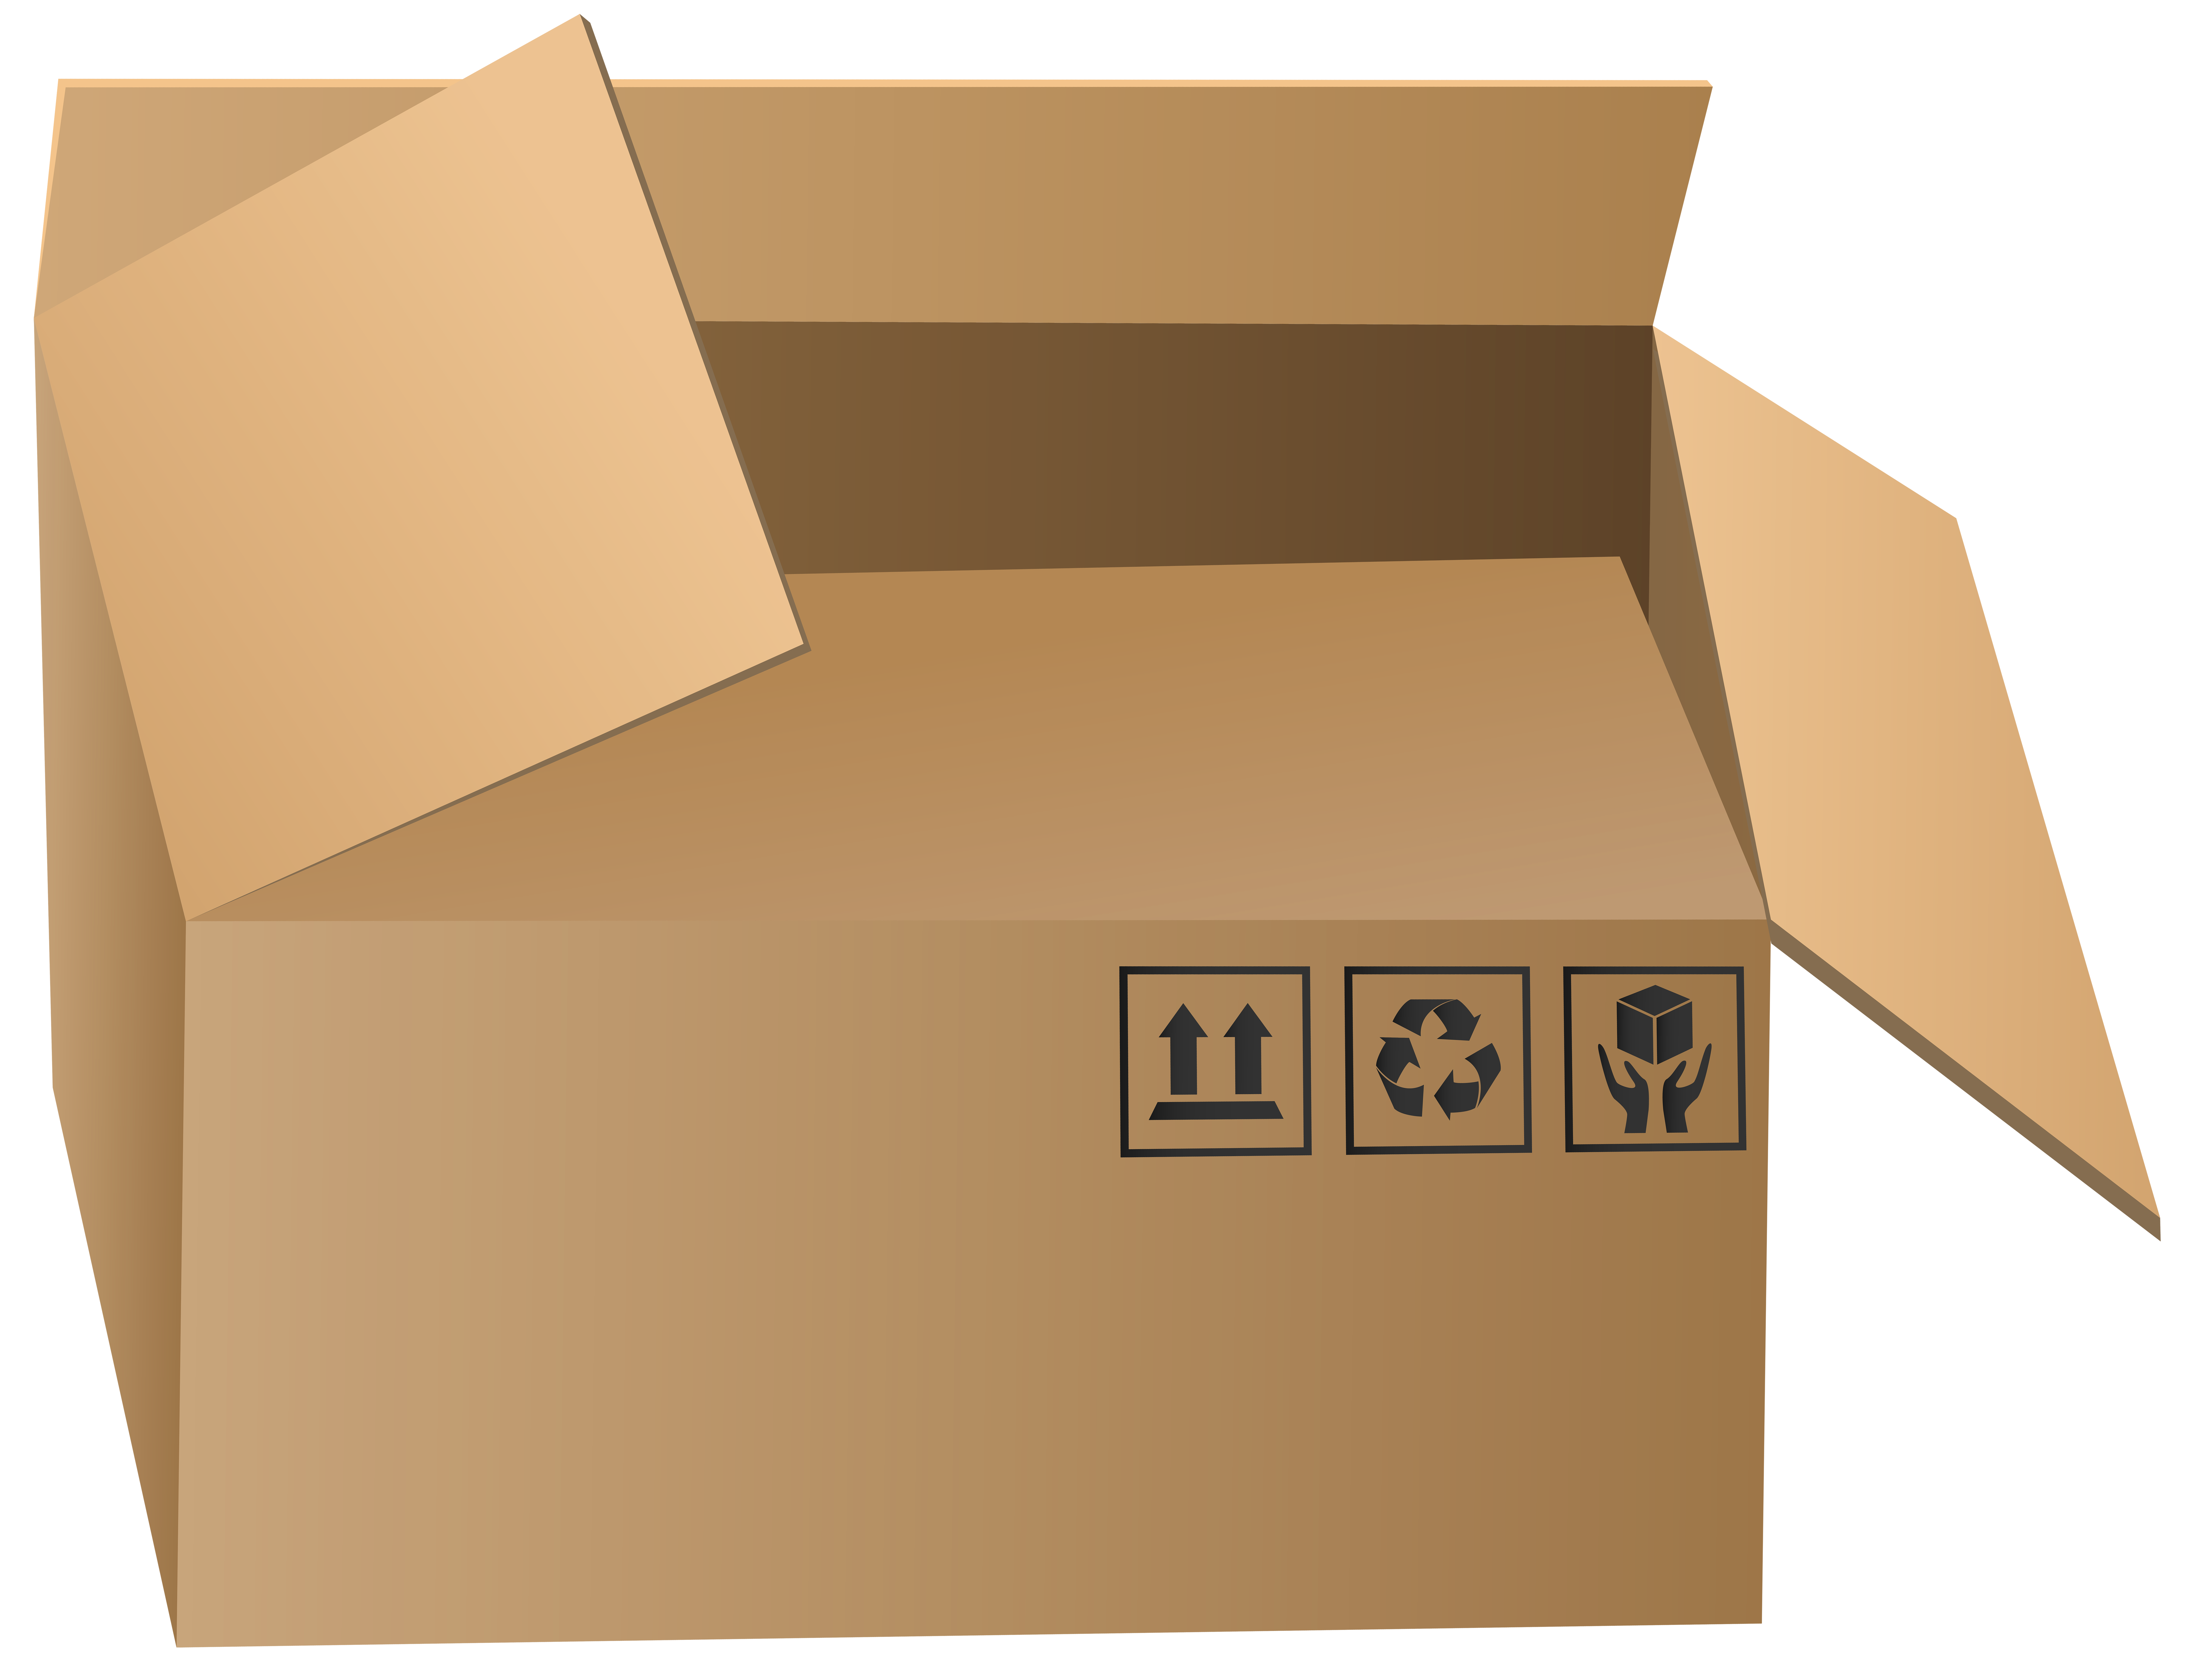 packing boxes clipart